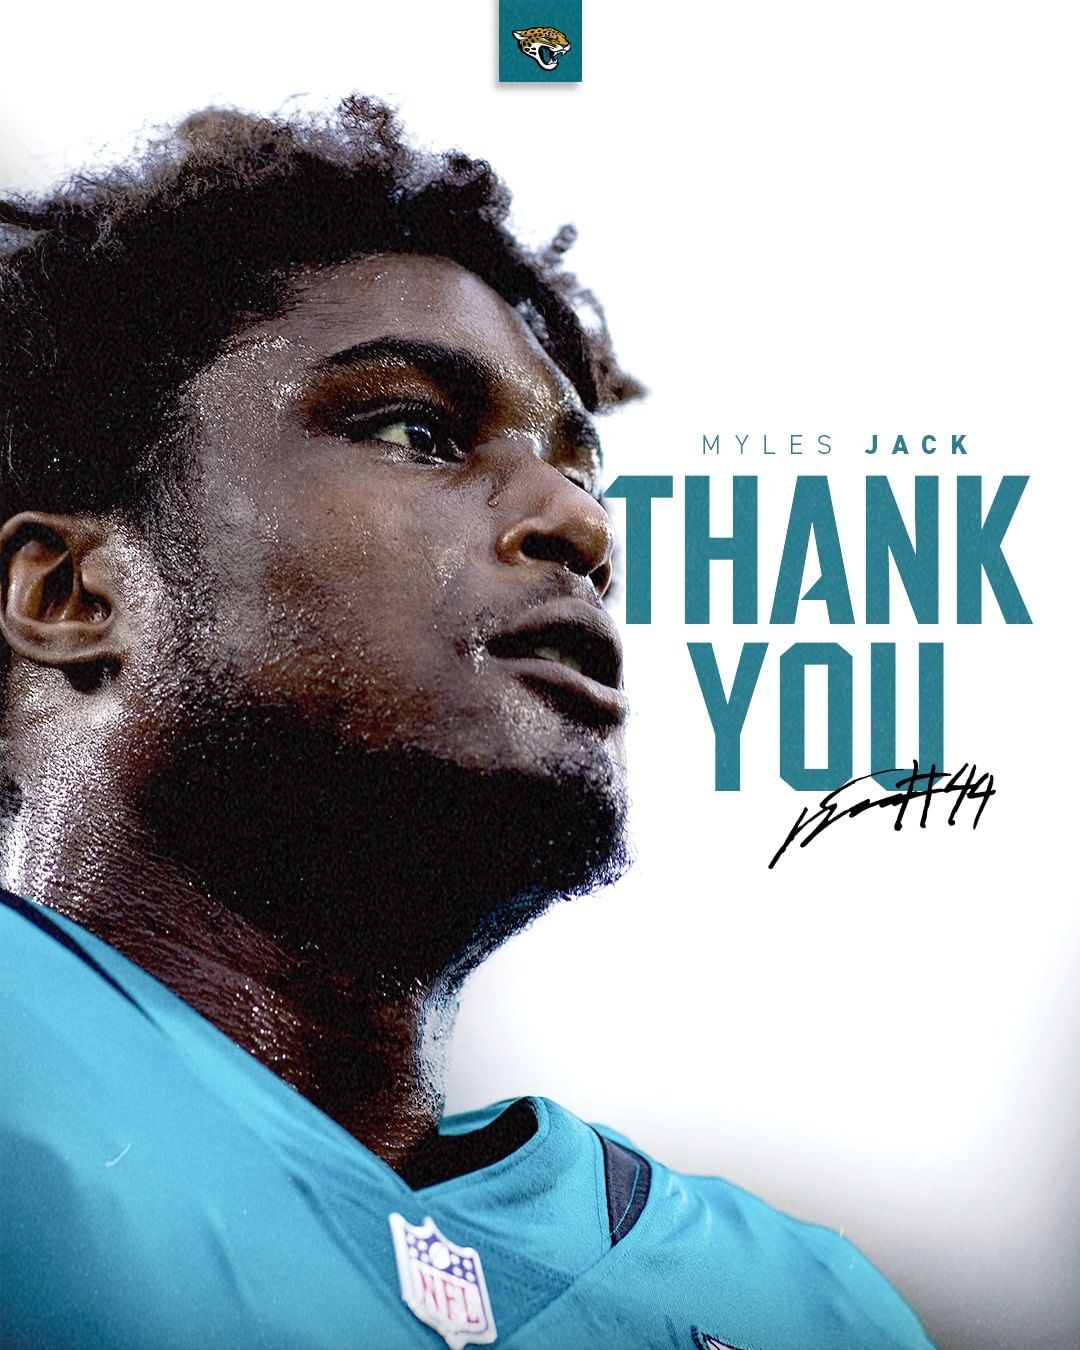 Myles Jack wasn't and will never be down....